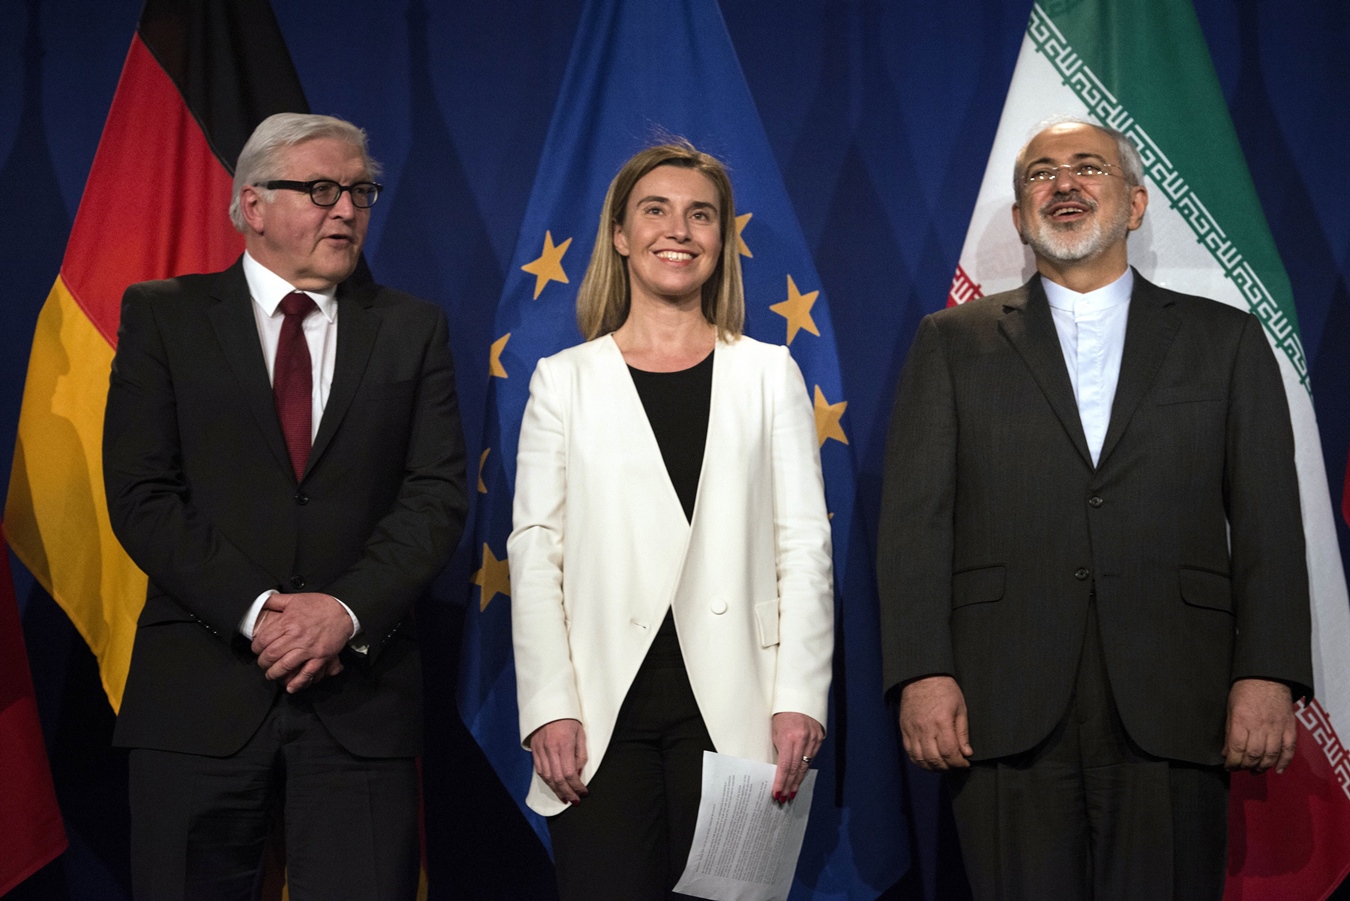 iranian foreign minister javad zarif r waits to make a statement flanked by german foreign minister frank walter steinmeier l and european union high representative for foreign affairs and security policy federica mogherini at the swiss federal institute of technology in lausanne ecole polytechnique federale de lausanne on april 2 2015 after iran nuclear program talks finished with extended sessions photo afp